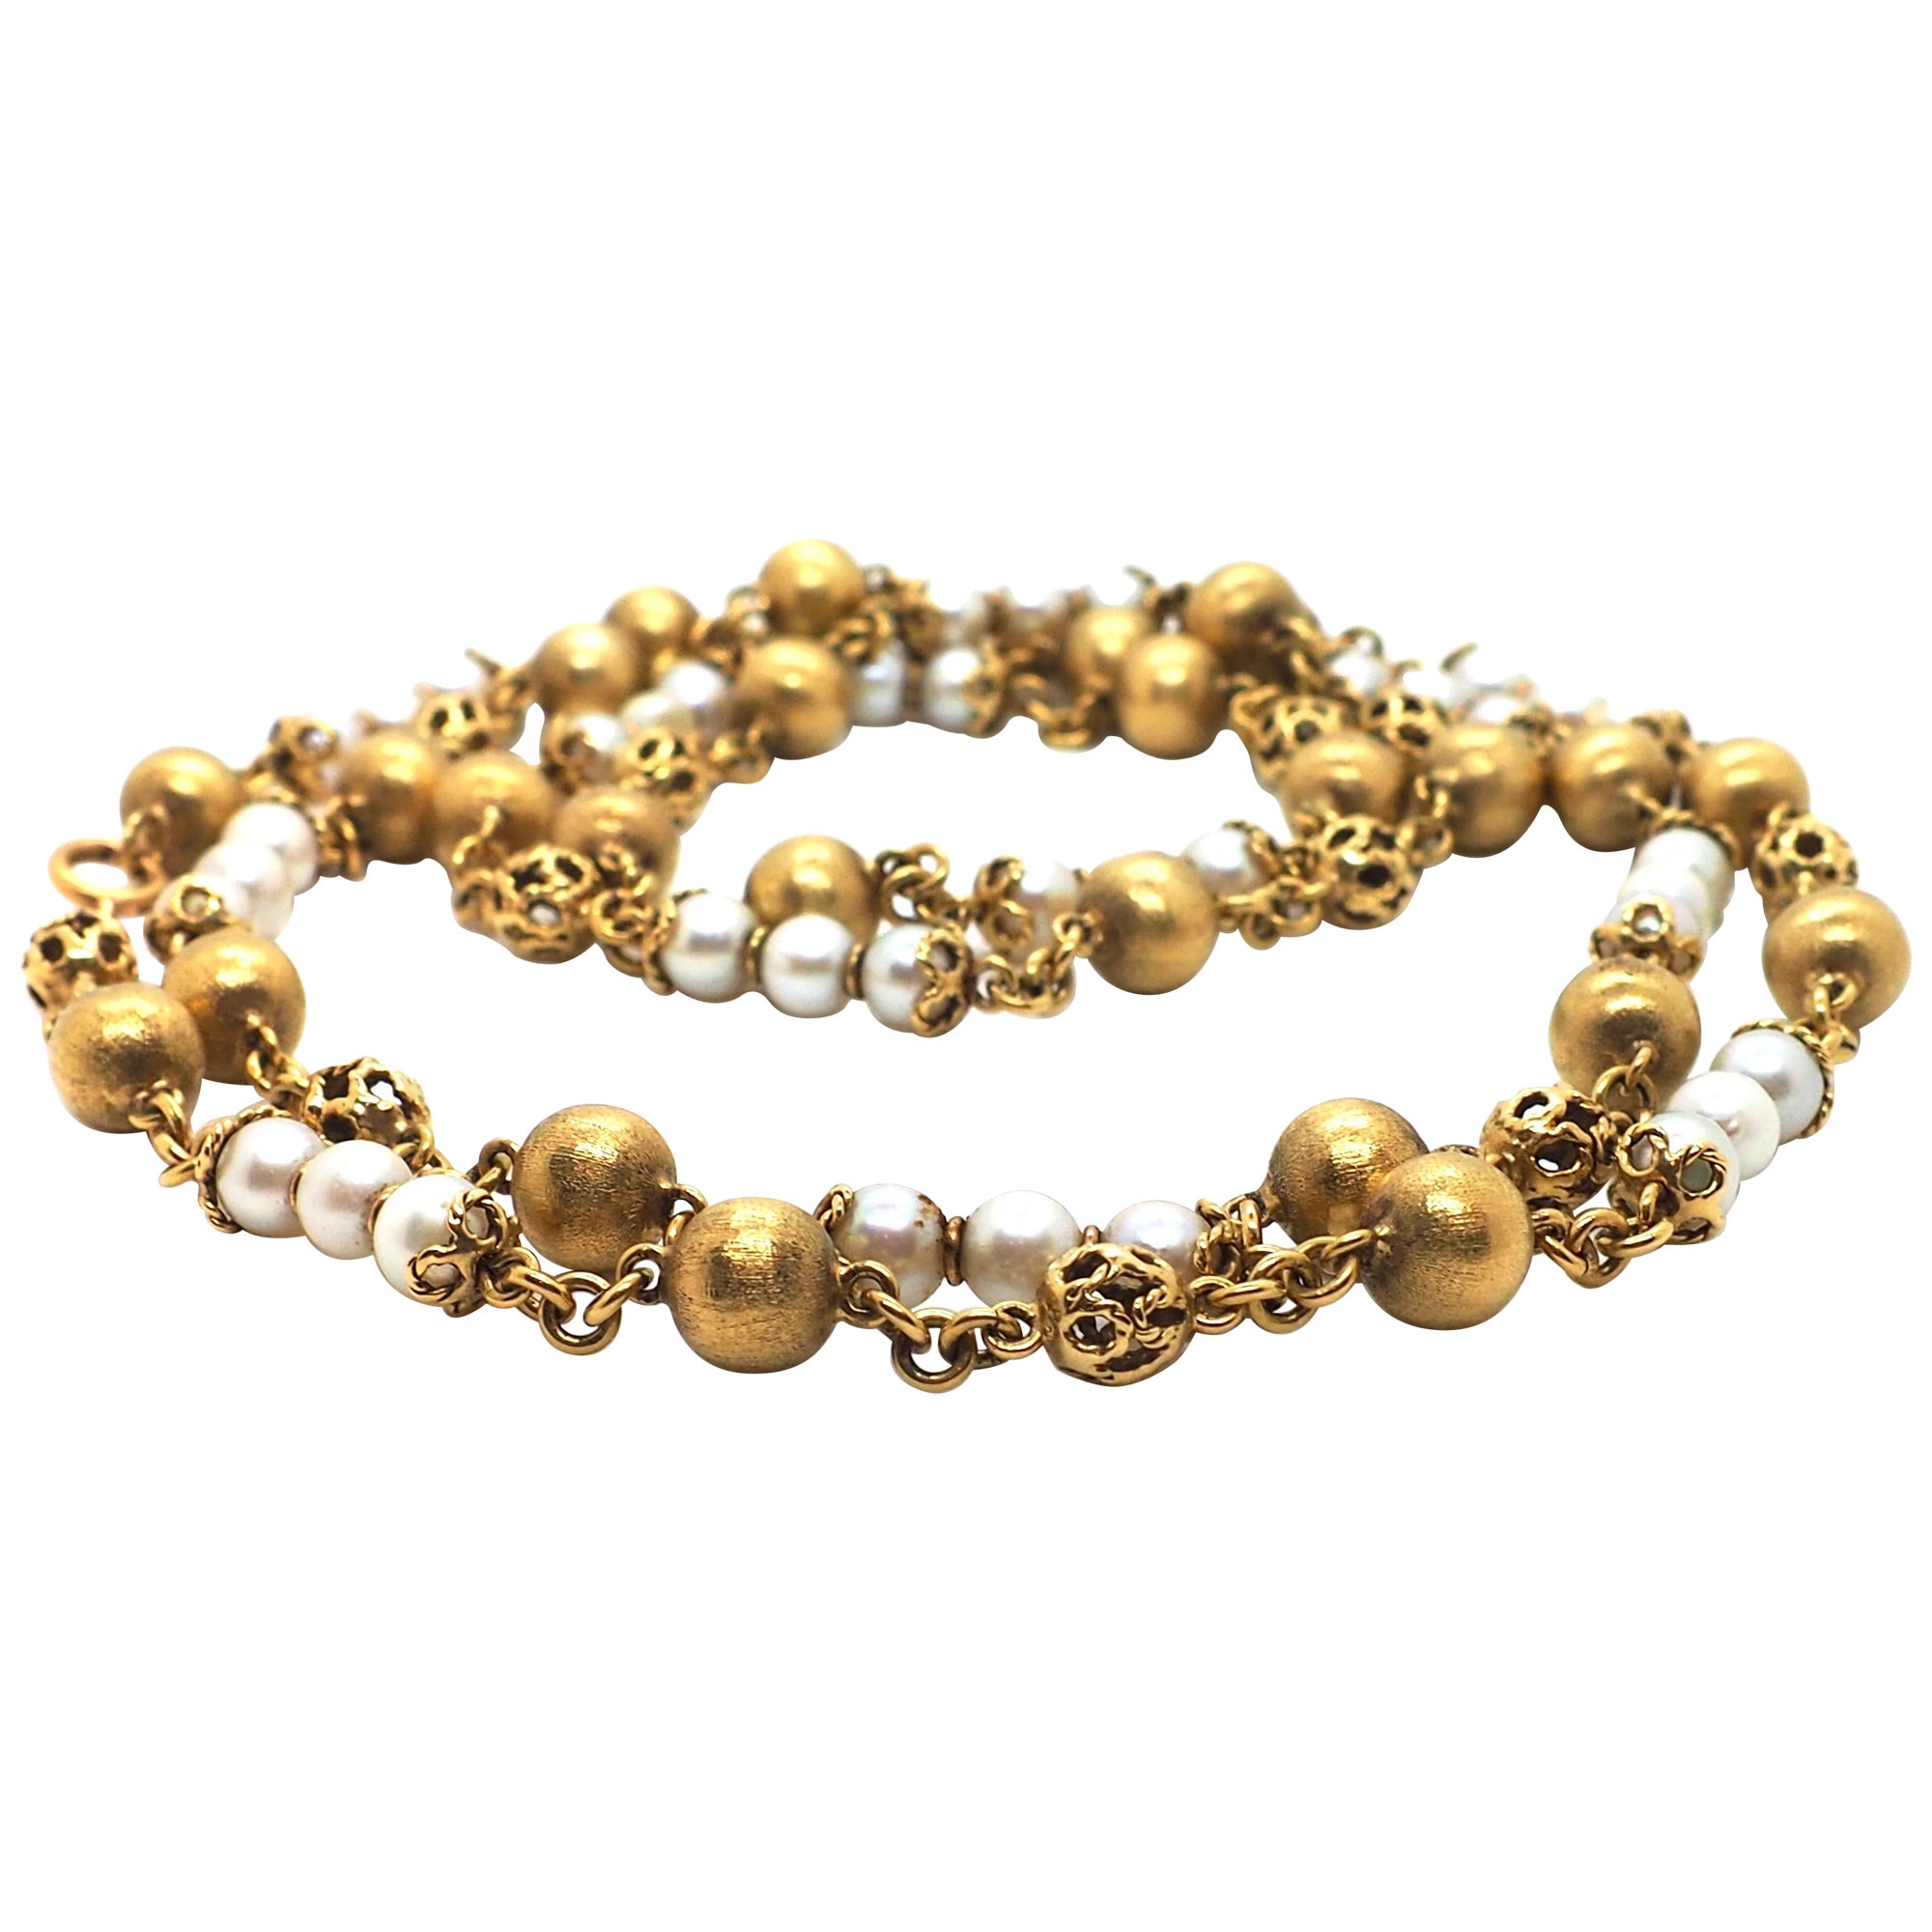 Elegant Beaded Necklace in 18K Yellow Gold, Adorned with 39 Handpicked Pearls For Sale